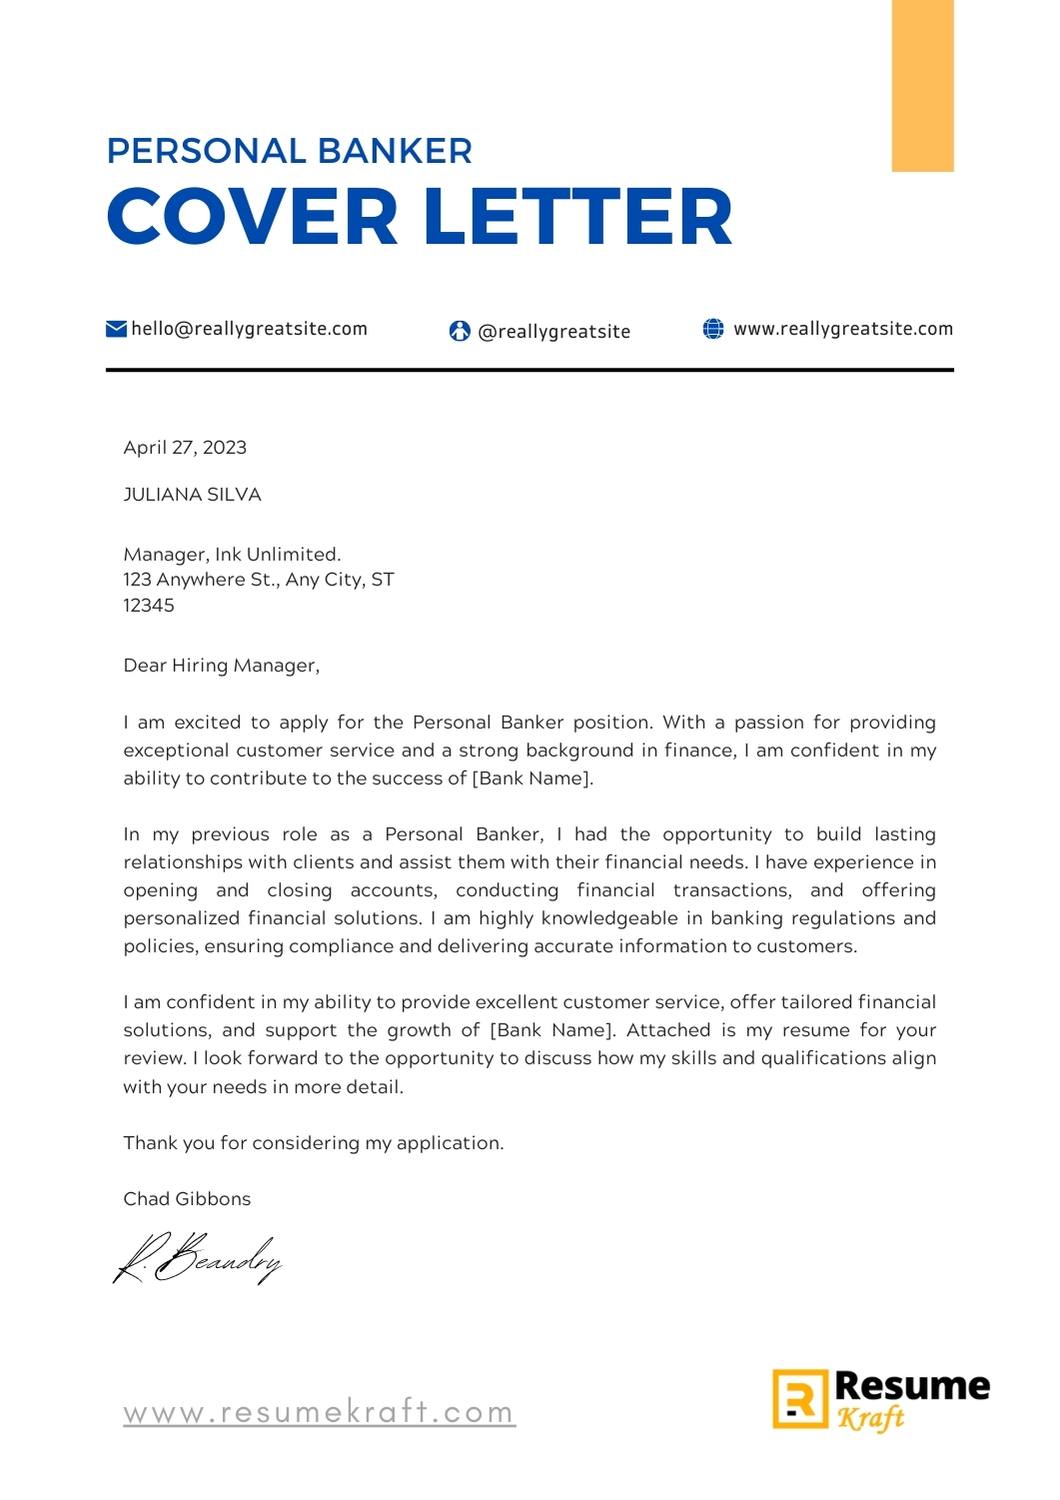 5 Personal Banker Cover Letter Examples And Templates 2023 Resumekraft 9192